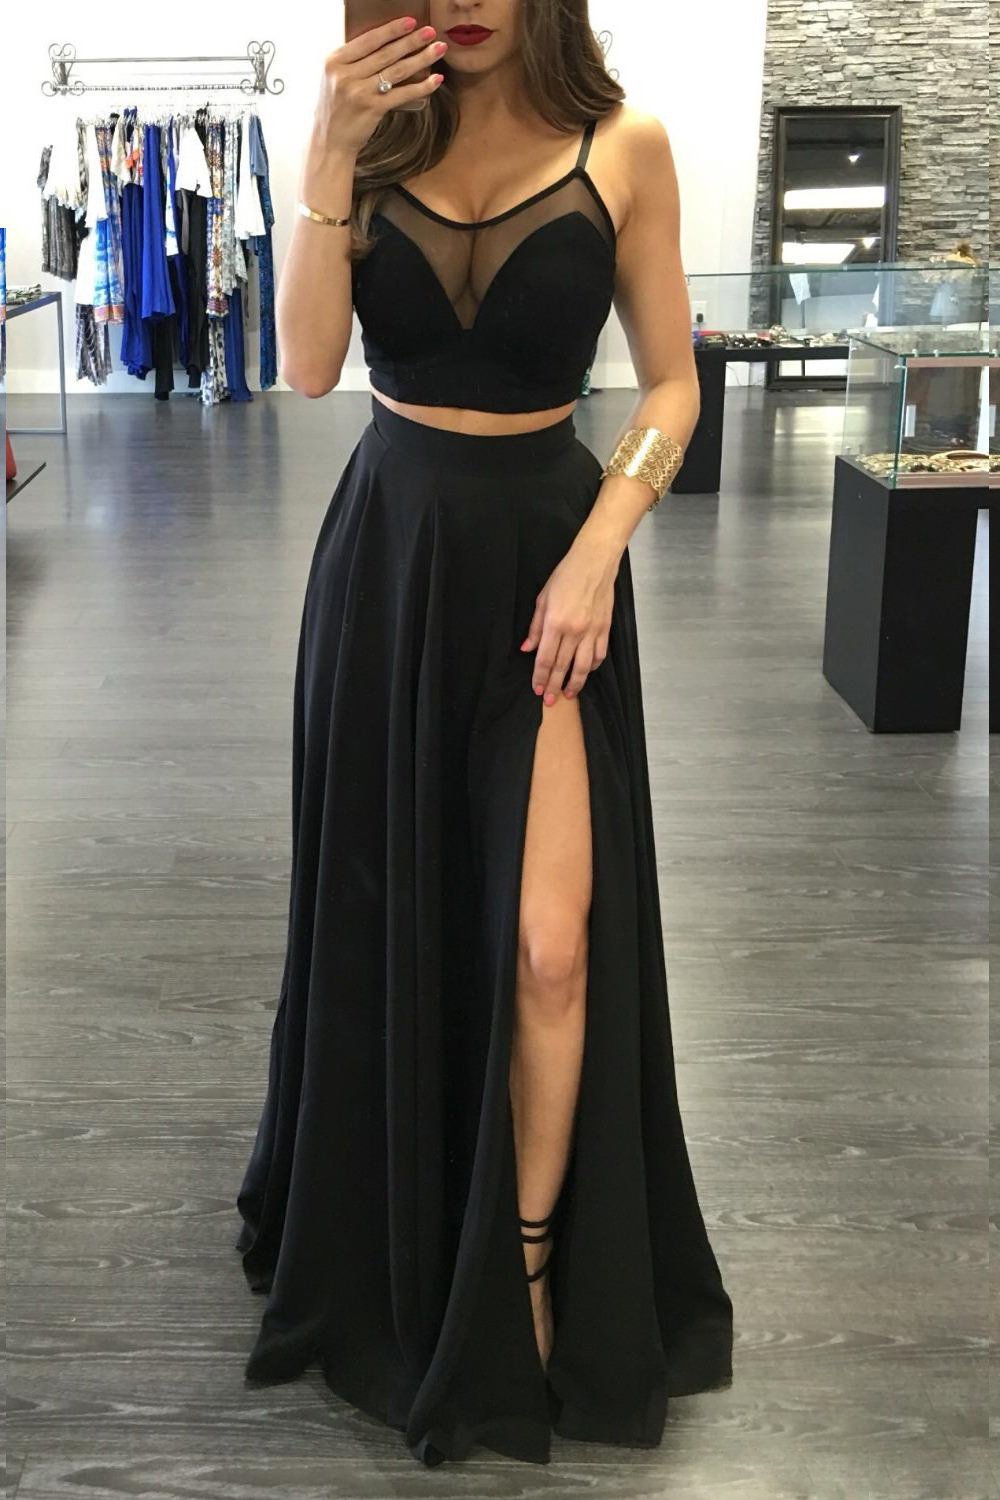 Black Evening Dress A-line Sweetheart Spaghetti Straps Bow Sleeveless  Backless Pockets Satin Tea-Length Formal Party Prom Gown - AliExpress